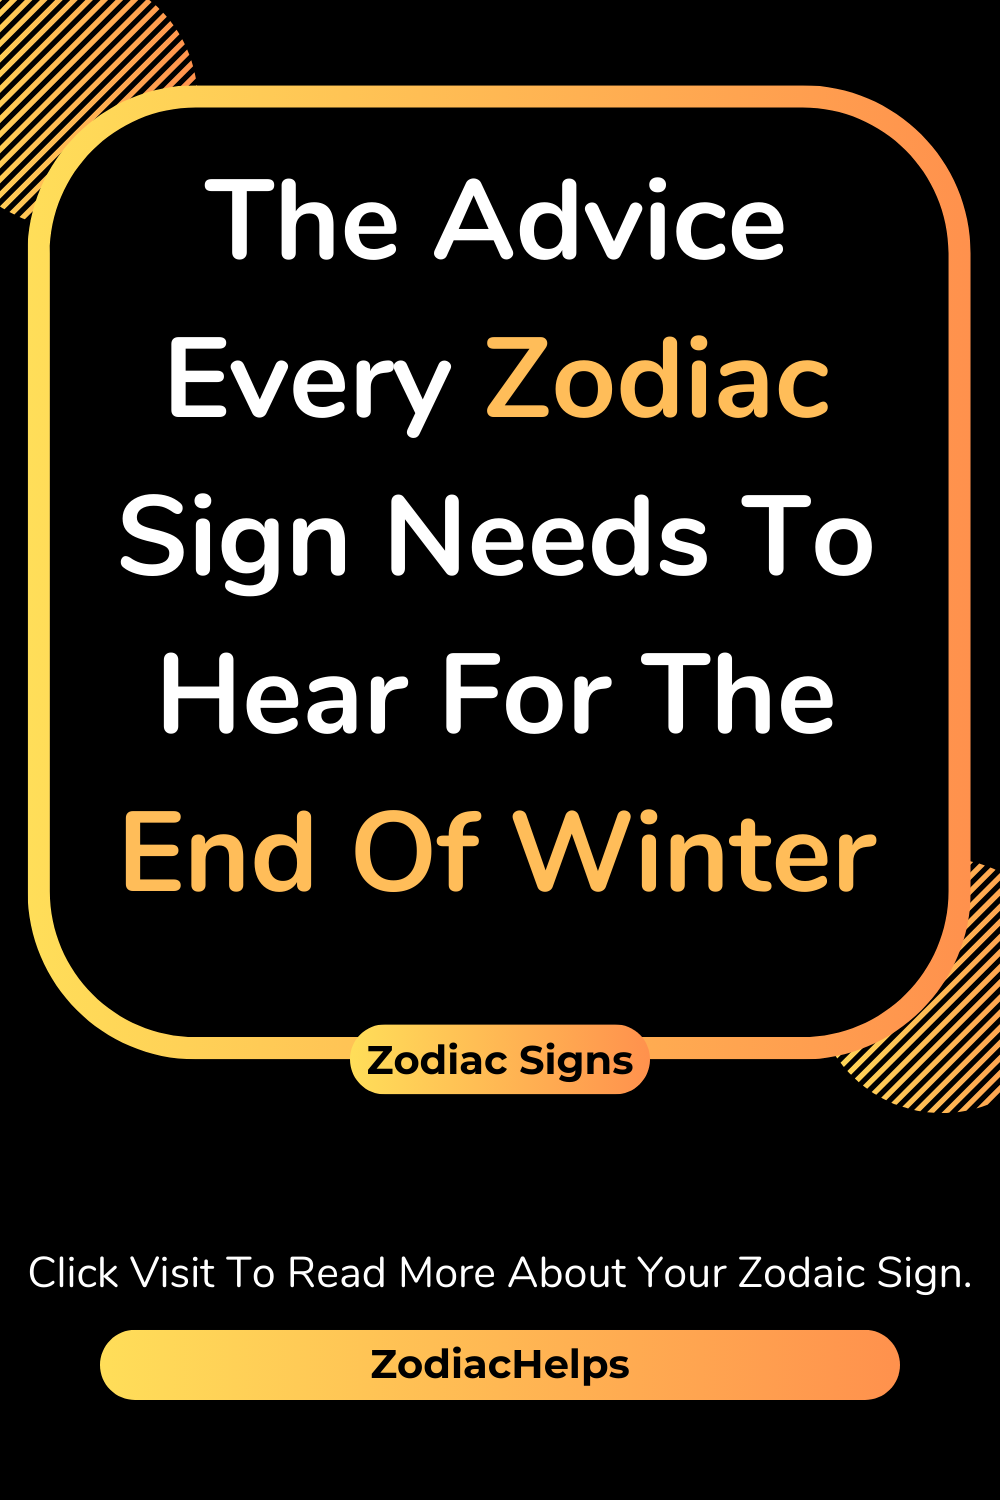 The Advice Every Zodiac Sign Needs To Hear For The End Of Winter